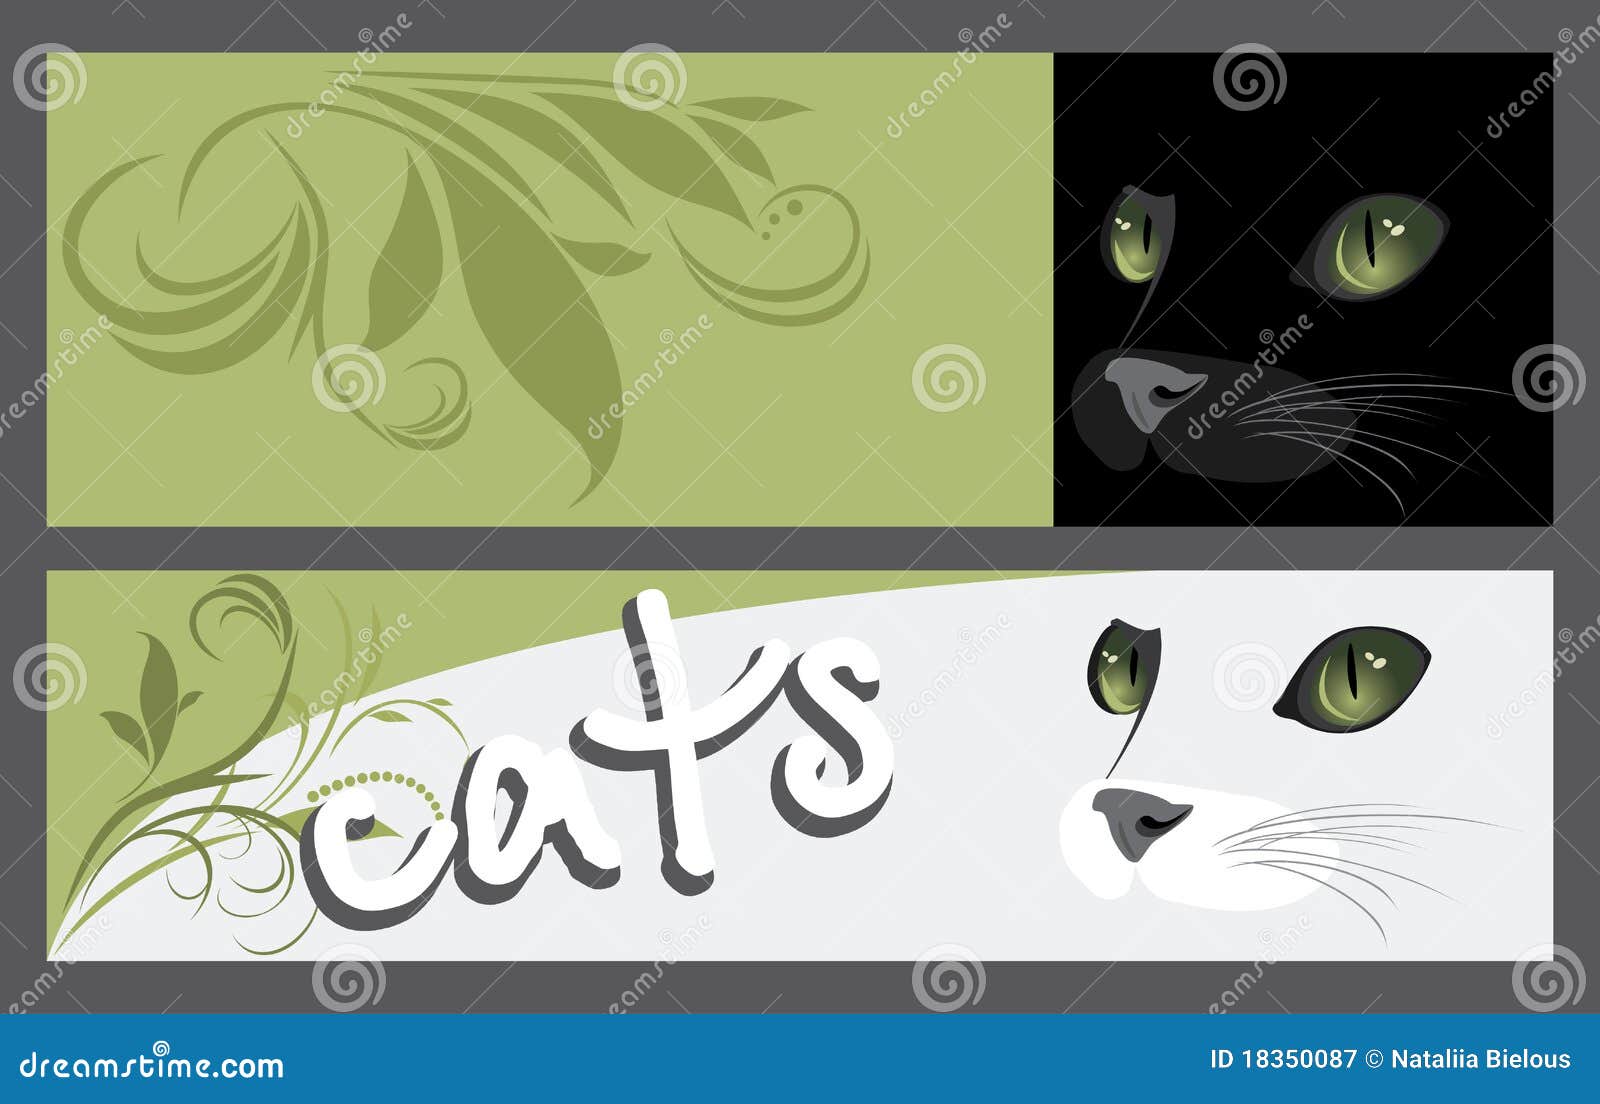 abstract two banners with muzzle of cats